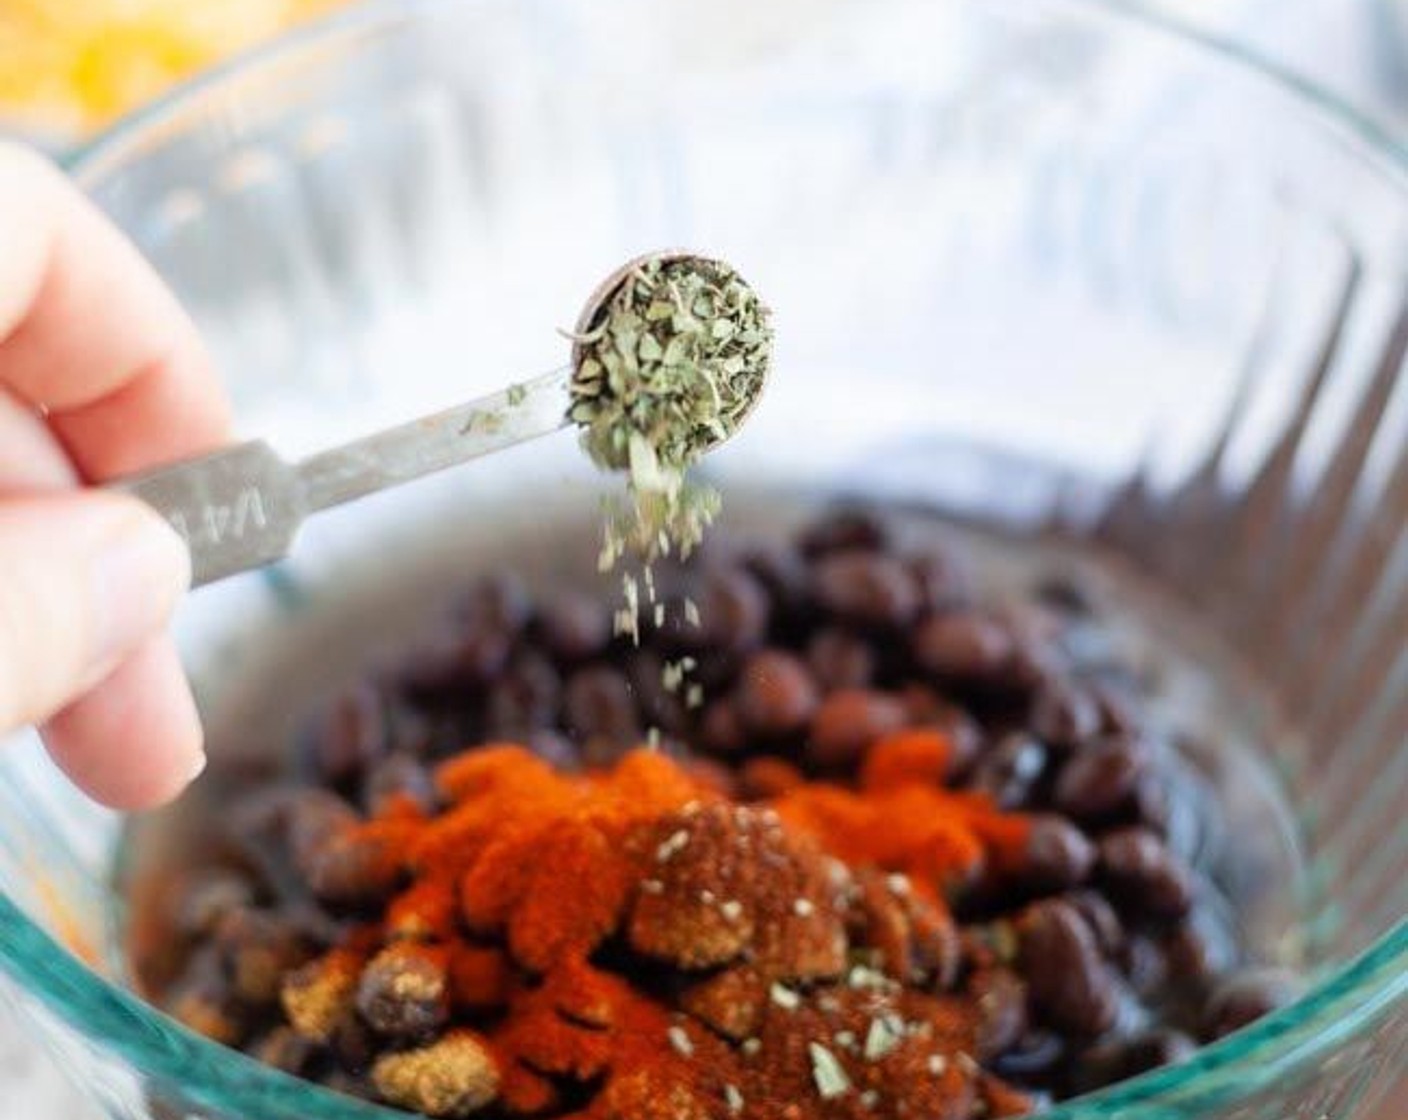 step 1 In a medium microwave-safe bowl pour in the Black Beans (1 can), Water (1/4 cup), Ground Cumin (1 tsp), Smoked Paprika (1 tsp), Chili Powder (1/2 tsp), Cayenne Pepper (1/4 tsp) and Dried Oregano (1/4 tsp). Season with Sea Salt (to taste) and Ground Black Pepper (to taste) and stir to combine.